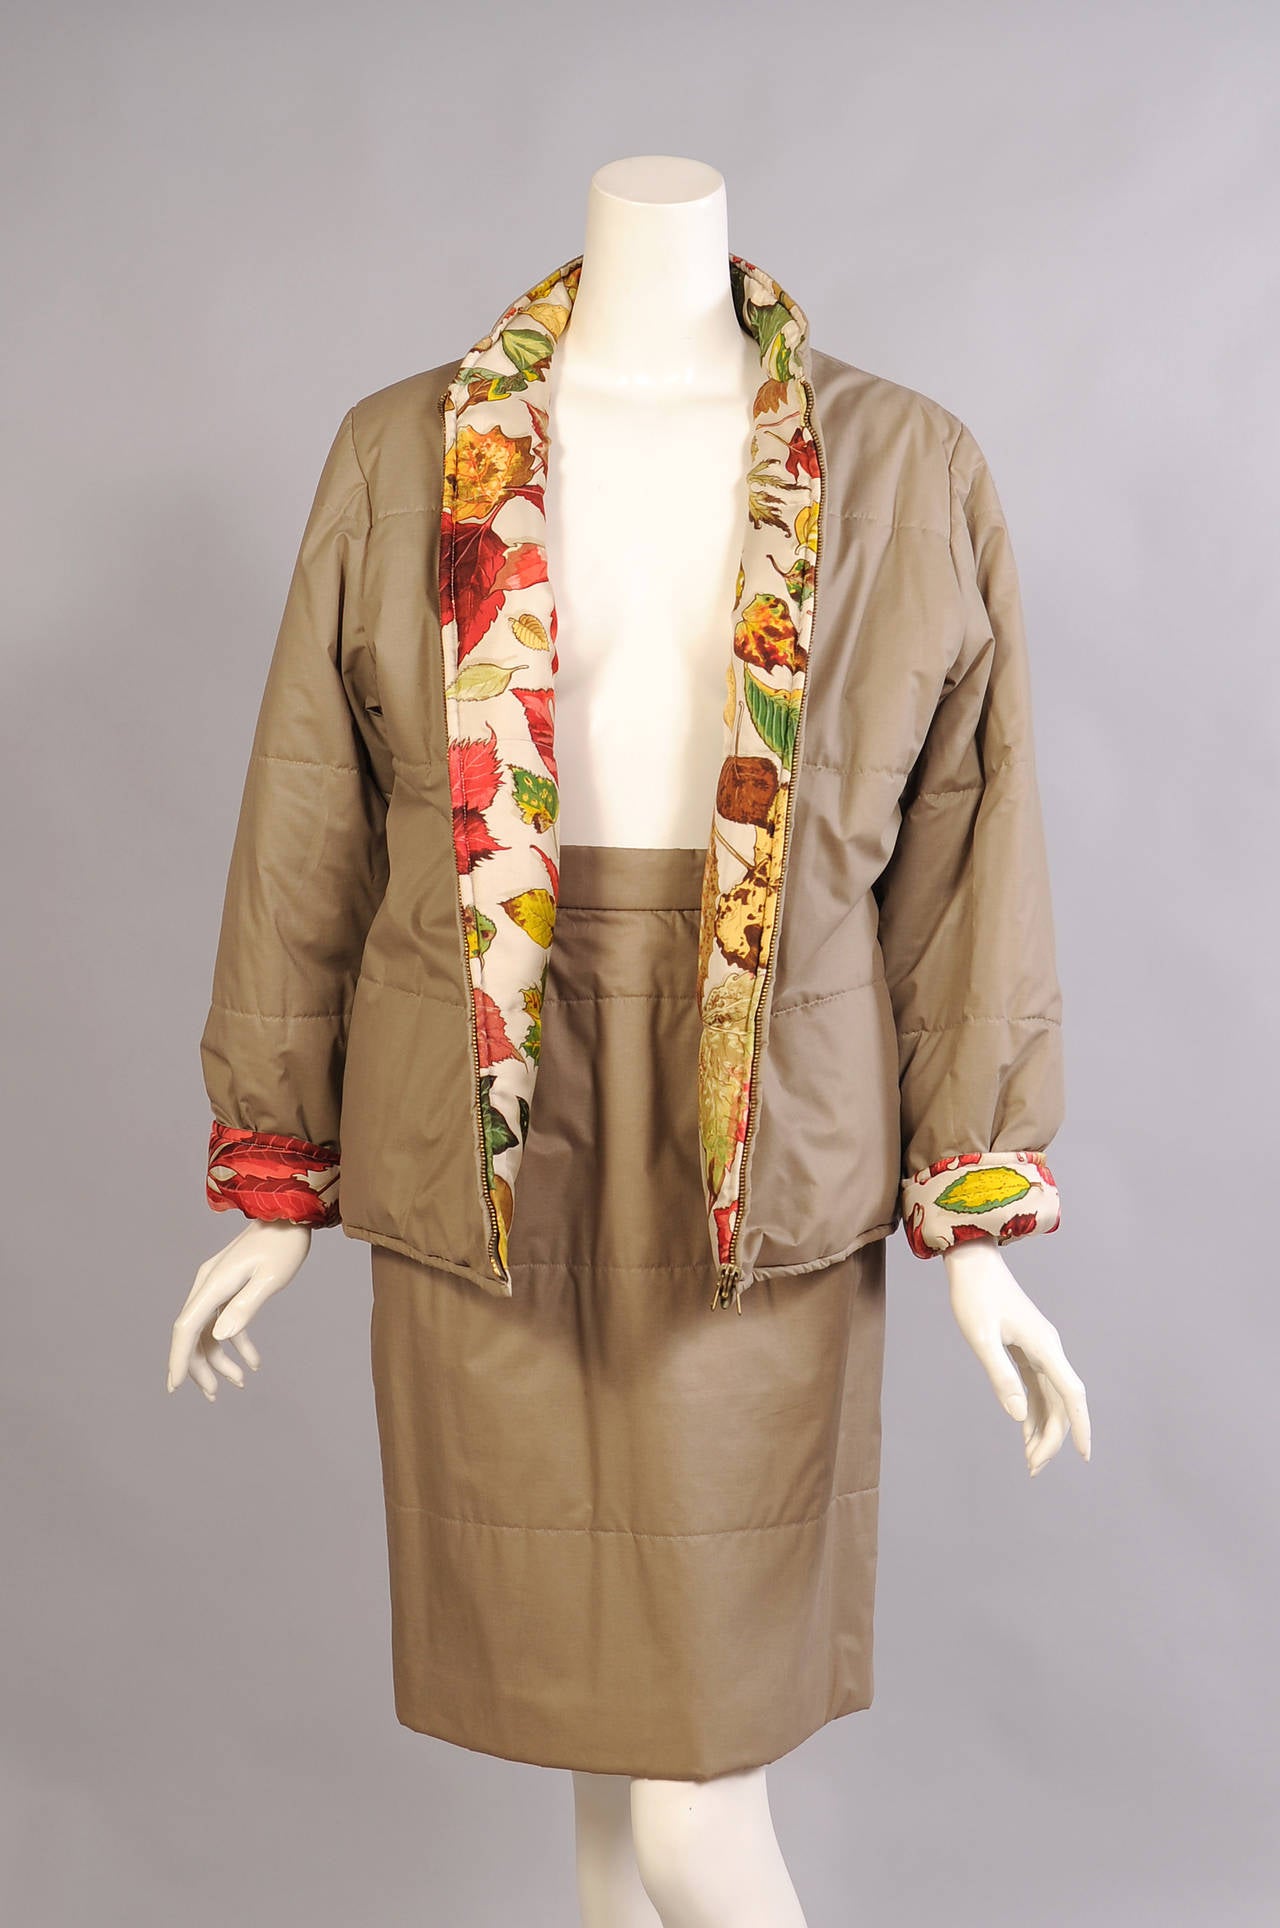 A classic Hermes scarf print of colorful leaves is used for one side of this reversible jacket. The other side is a cotton blend in a dark khaki color. The jacket zips up the front has pockets on both silk and cotton sides. A matching quilted khaki